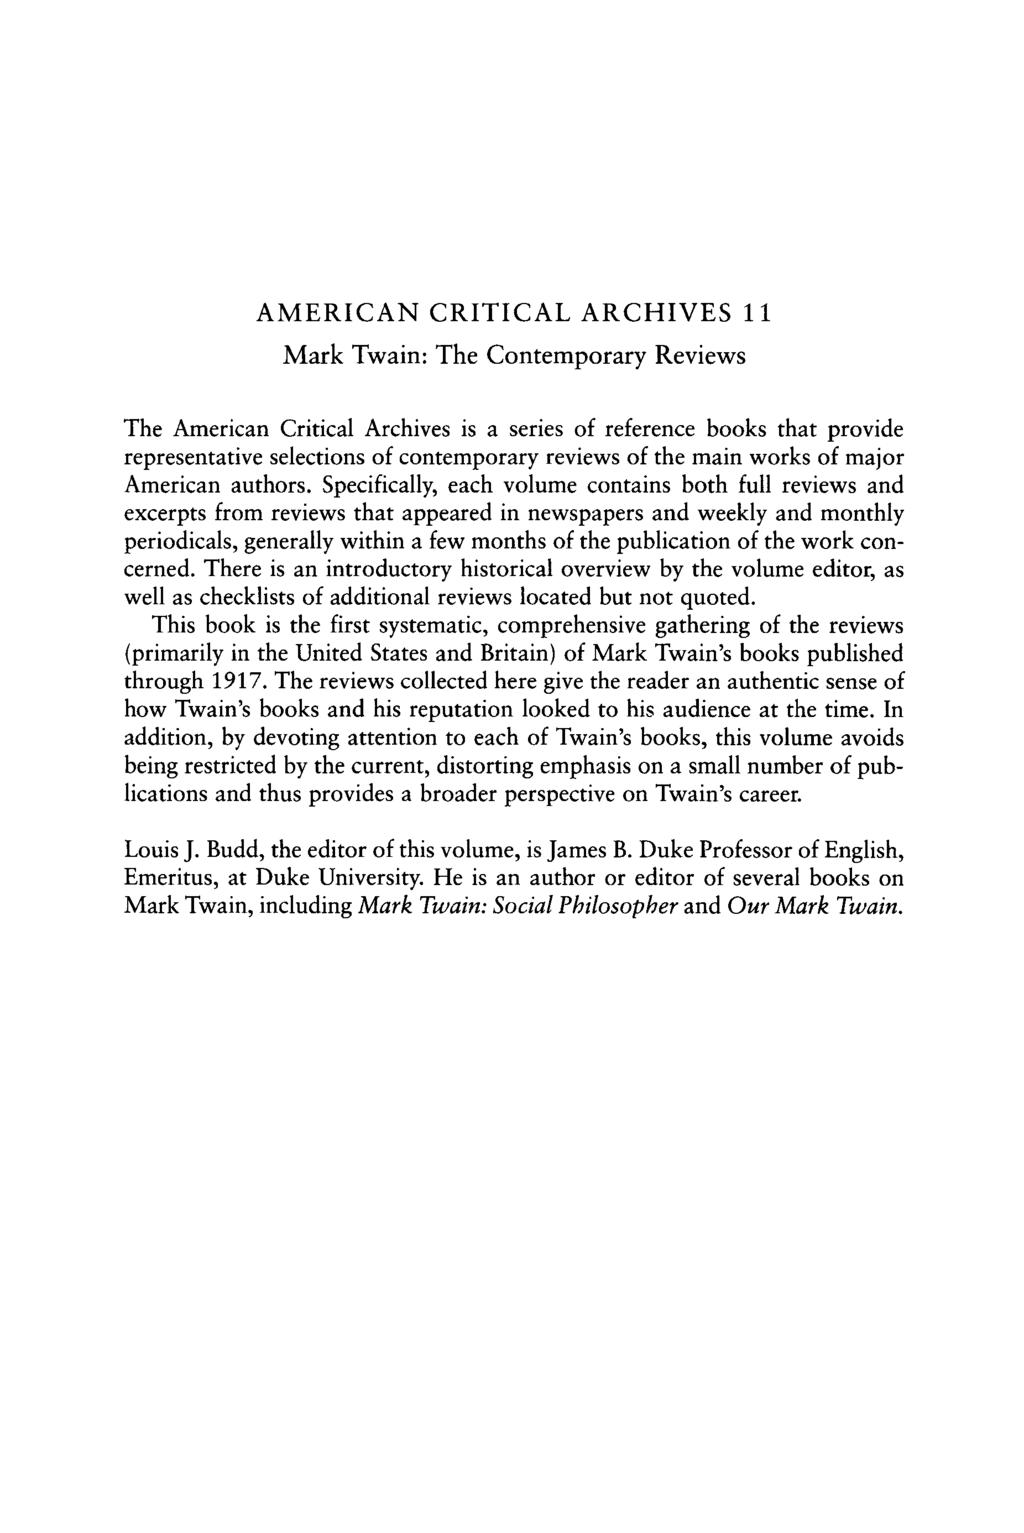 AMERICAN CRITICAL ARCHIVES 11 Mark Twain: The Contemporary Reviews The American Critical Archives is a series of reference books that provide representative selections of contemporary reviews of the